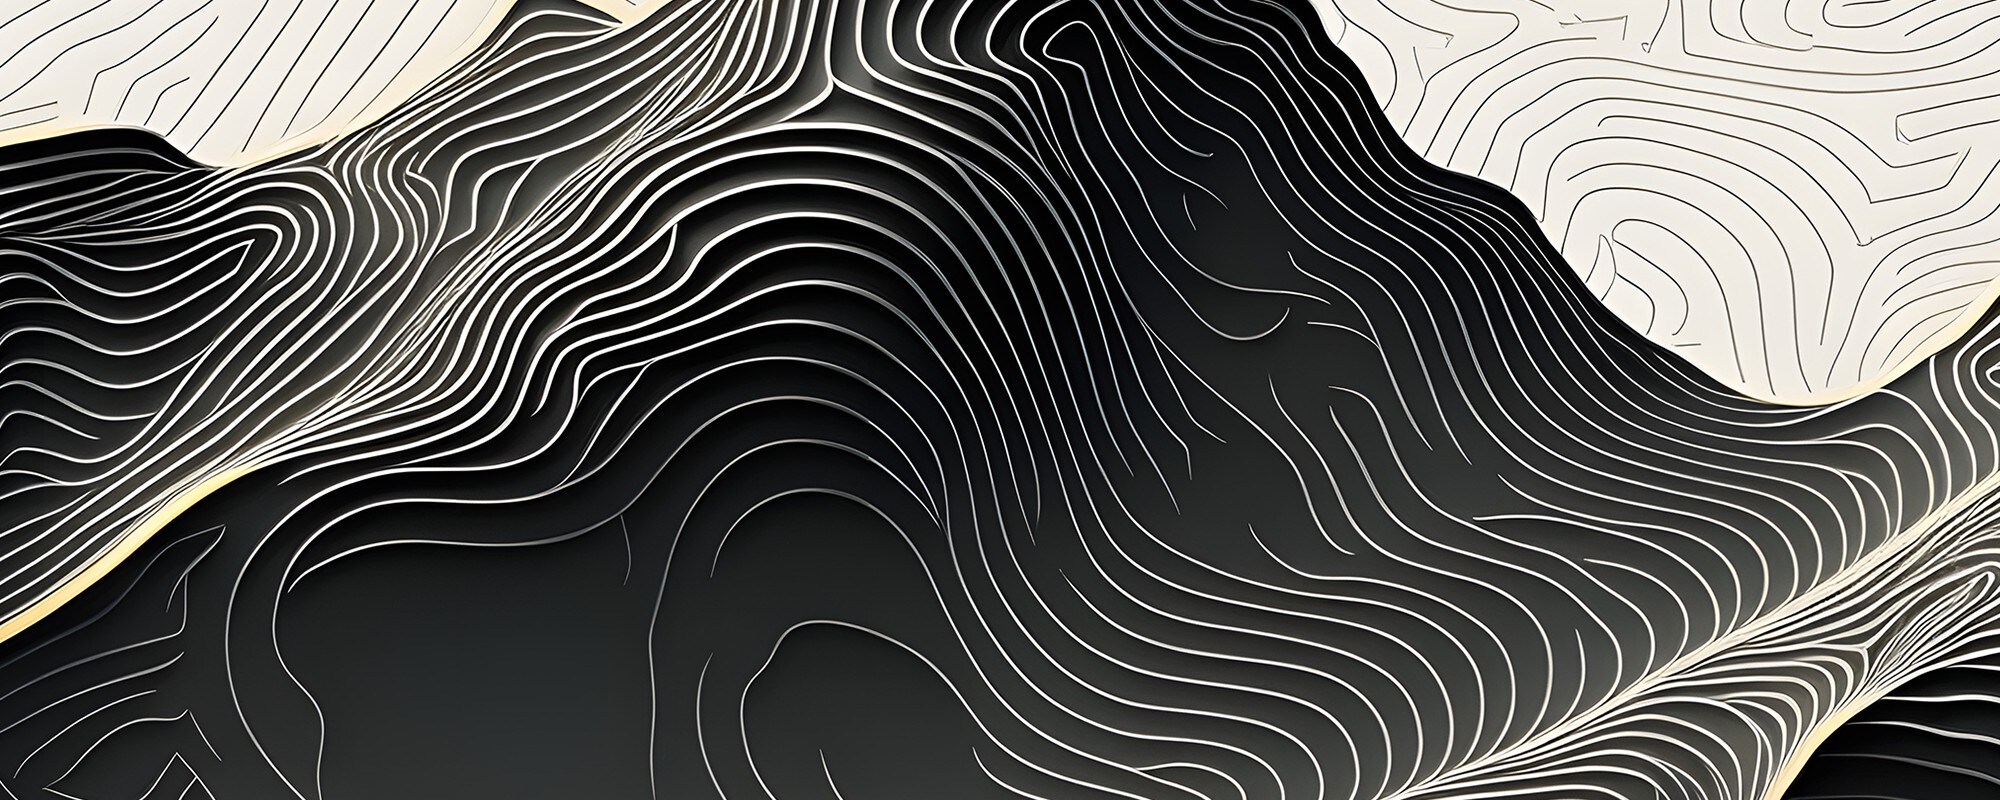 black and white mountains with a maze of lines